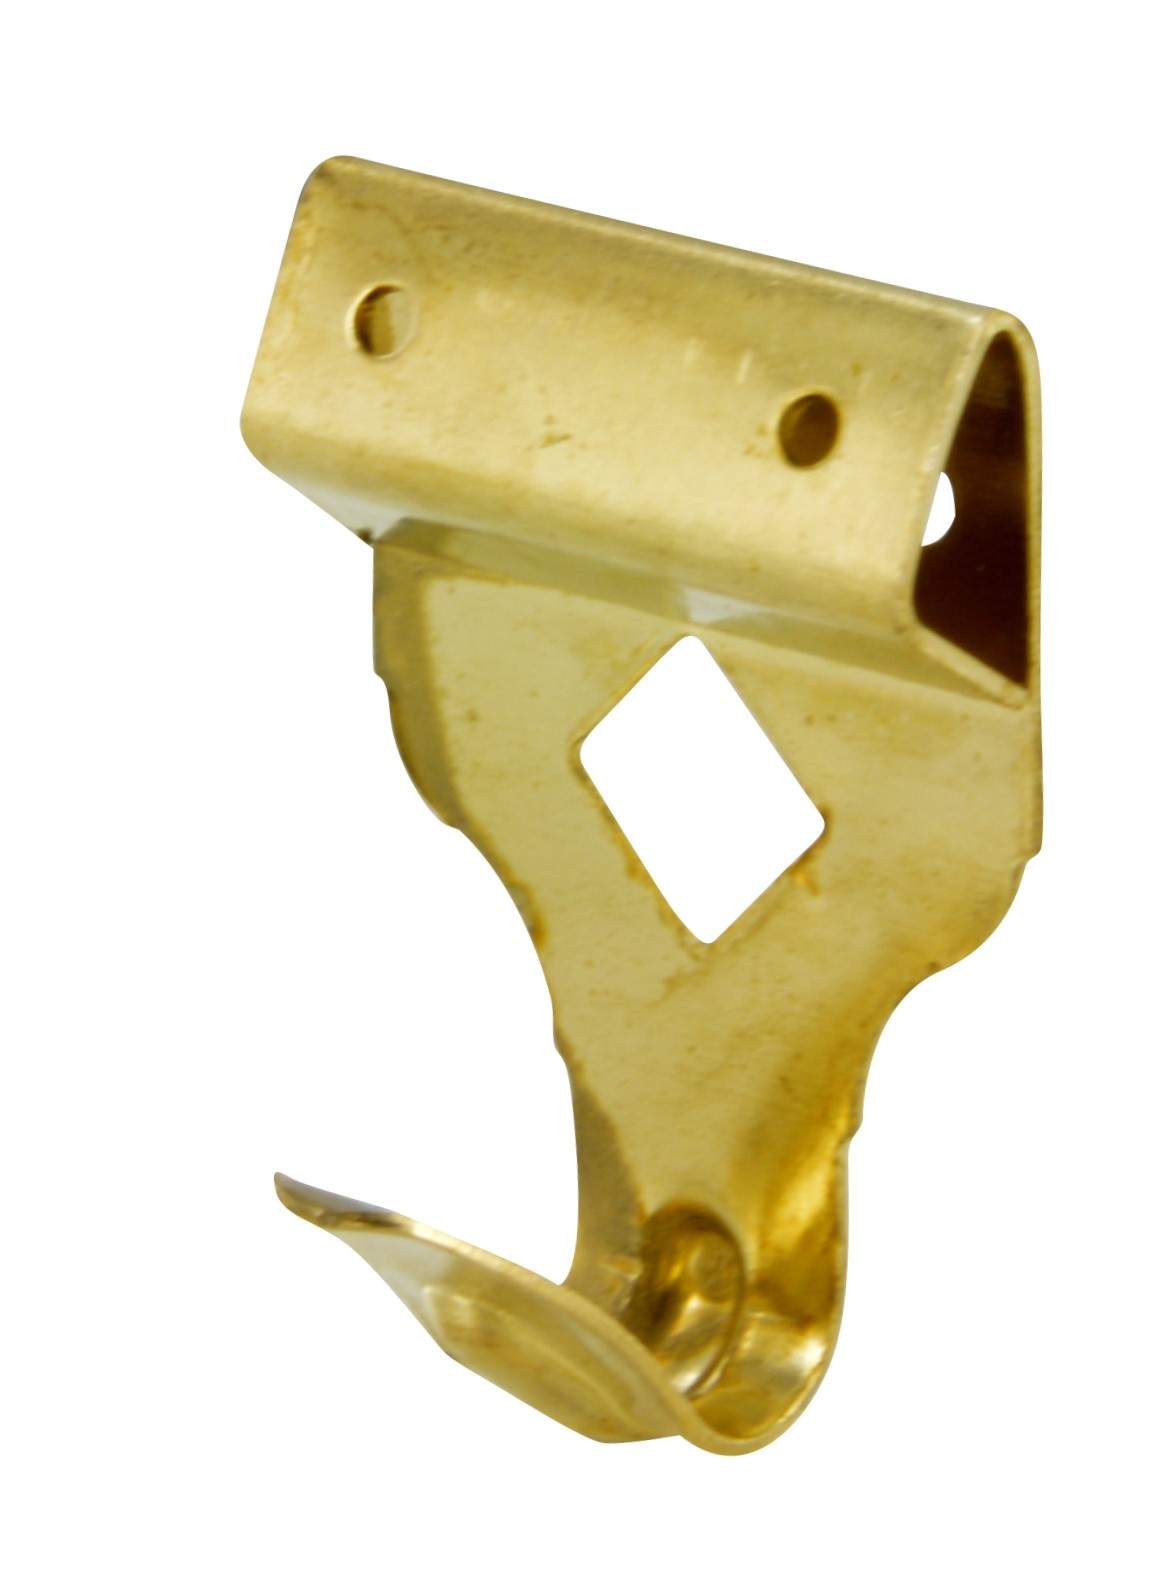 Panel hook N°3, brass-plated steel, H.31mm, L.20mm, 5 pieces with tip.